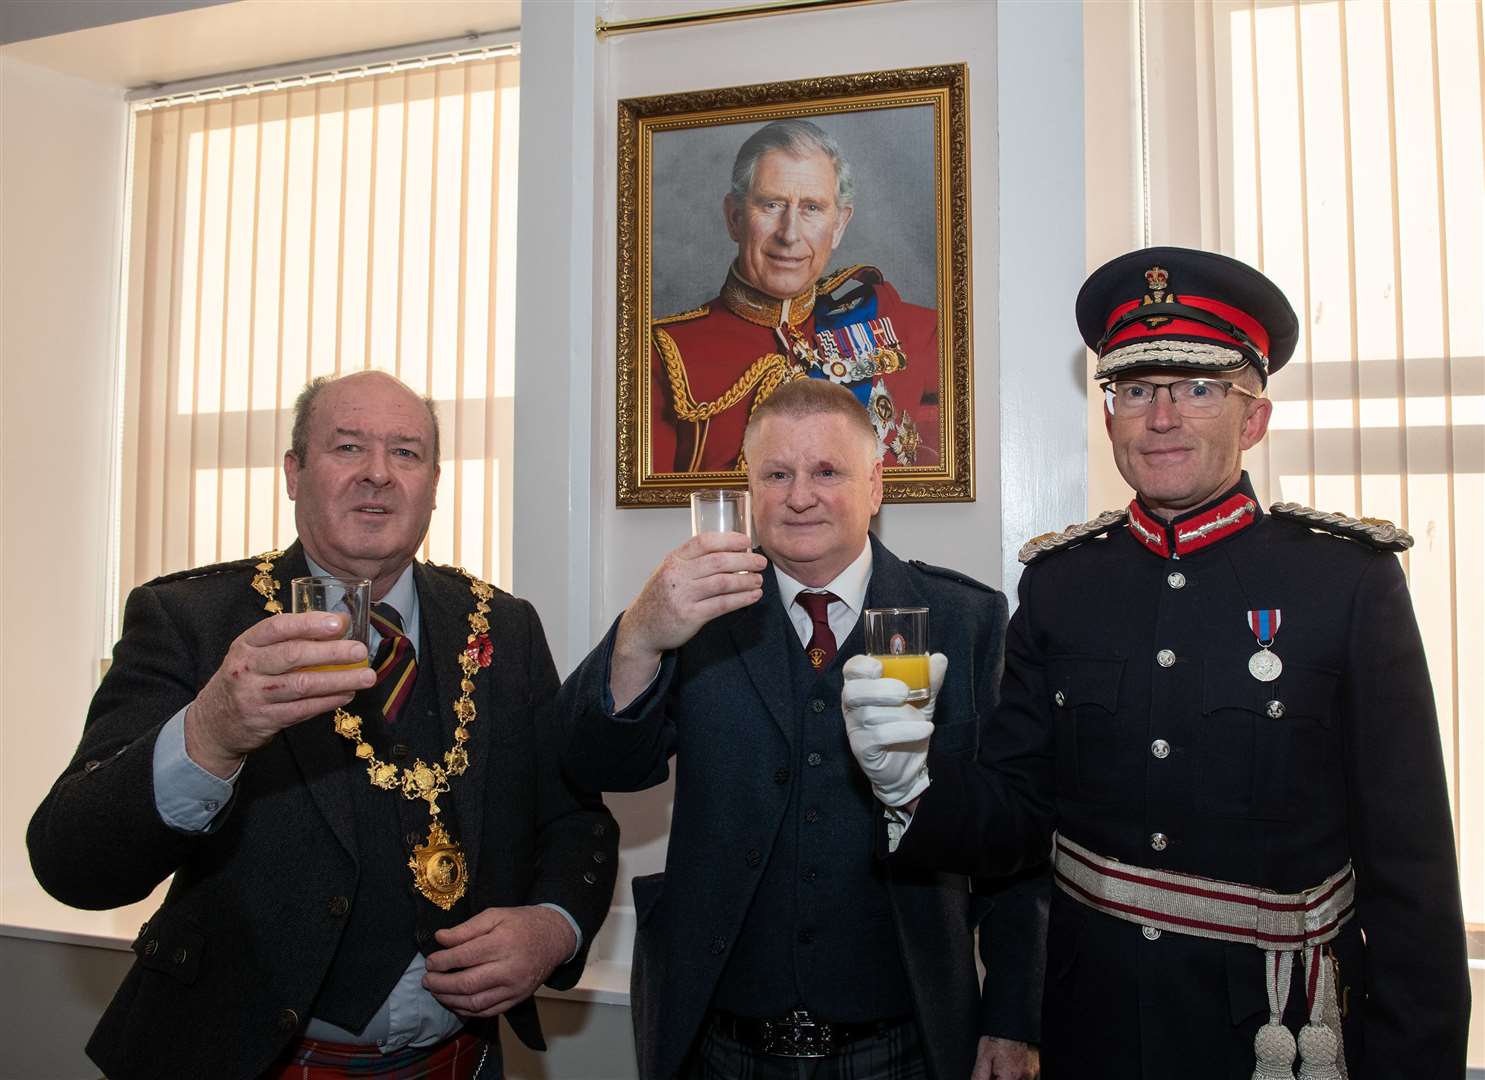 The unveiling of the portrait of King Charles at a ceremony held in The Seaforth Club, Nairn with (from left): Provost Laurie Fraser, Seaforth committee member Robert Hannah, Lord Lieutenant George Asher. Picture: Ian Macrae